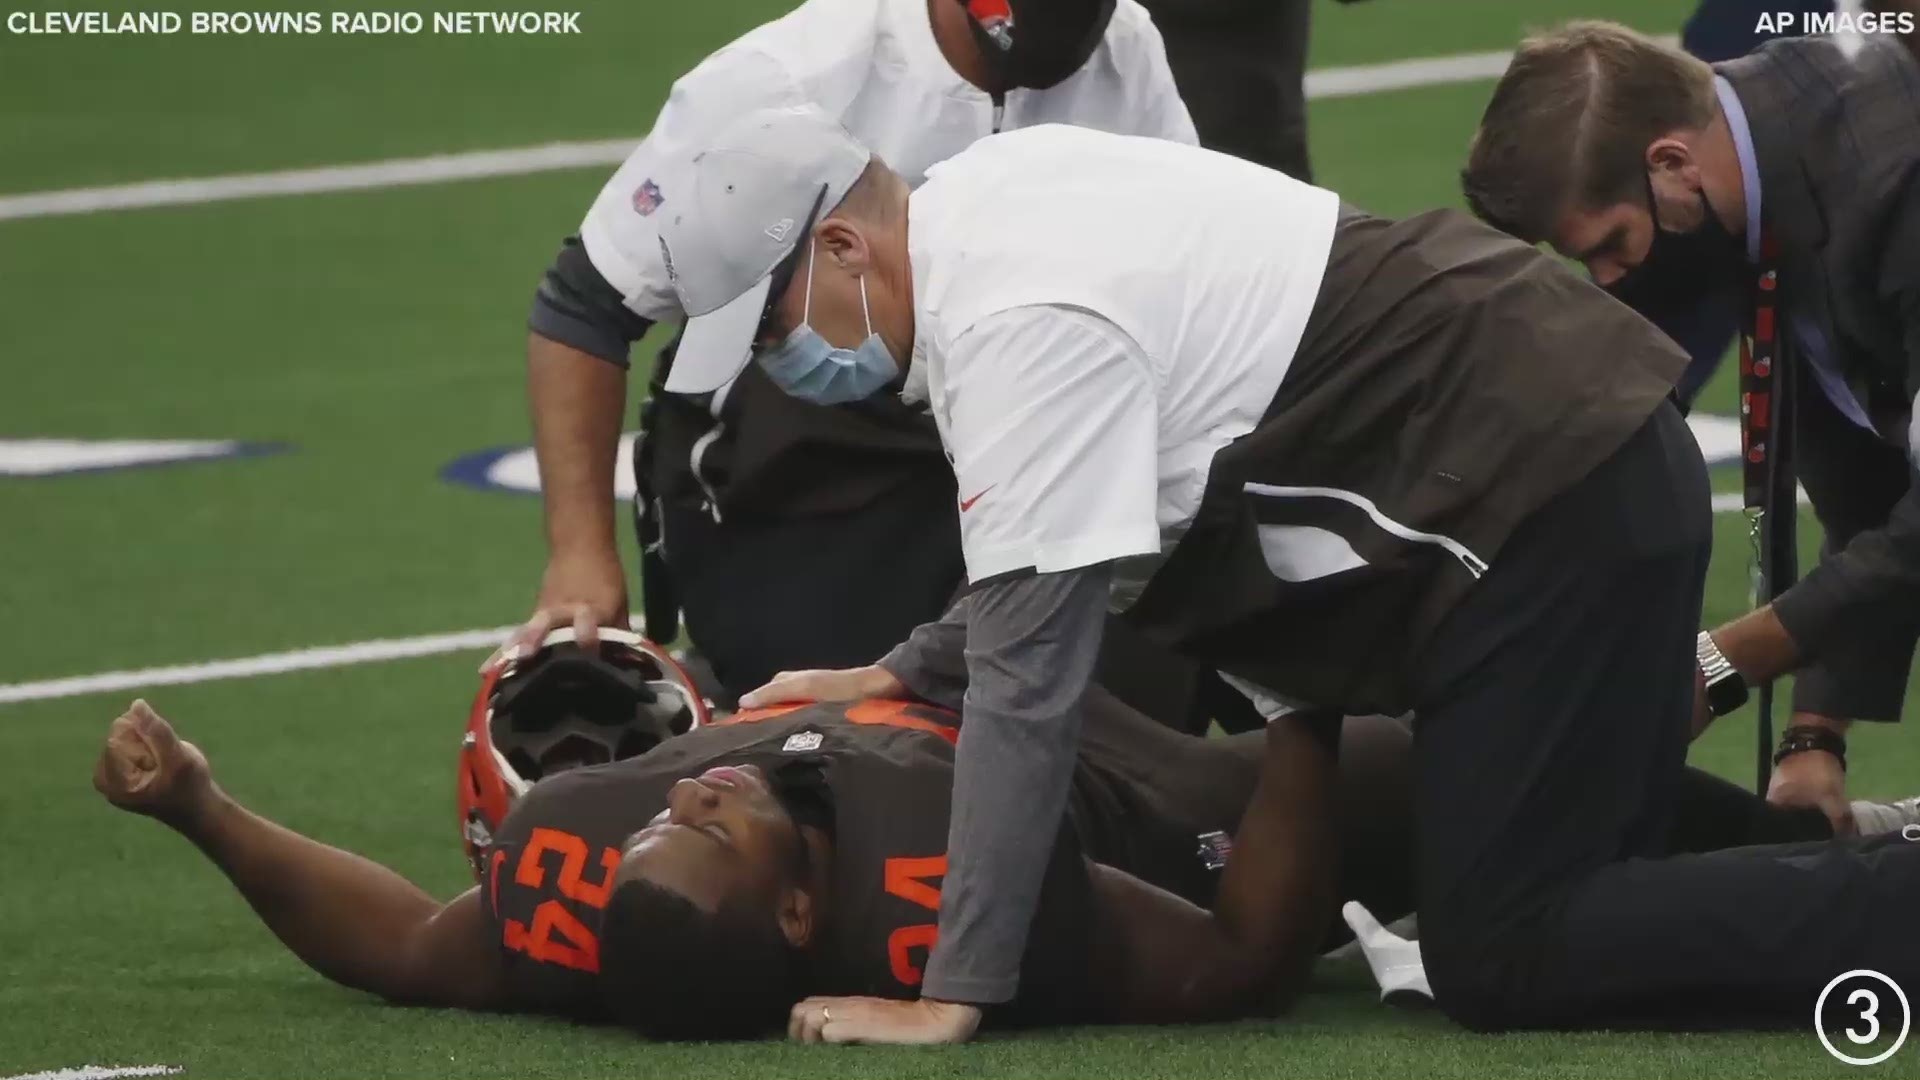 Cleveland Browns running back Nick Chubb left his team's game vs. the Dallas Cowboys with a knee injury on Sunday.